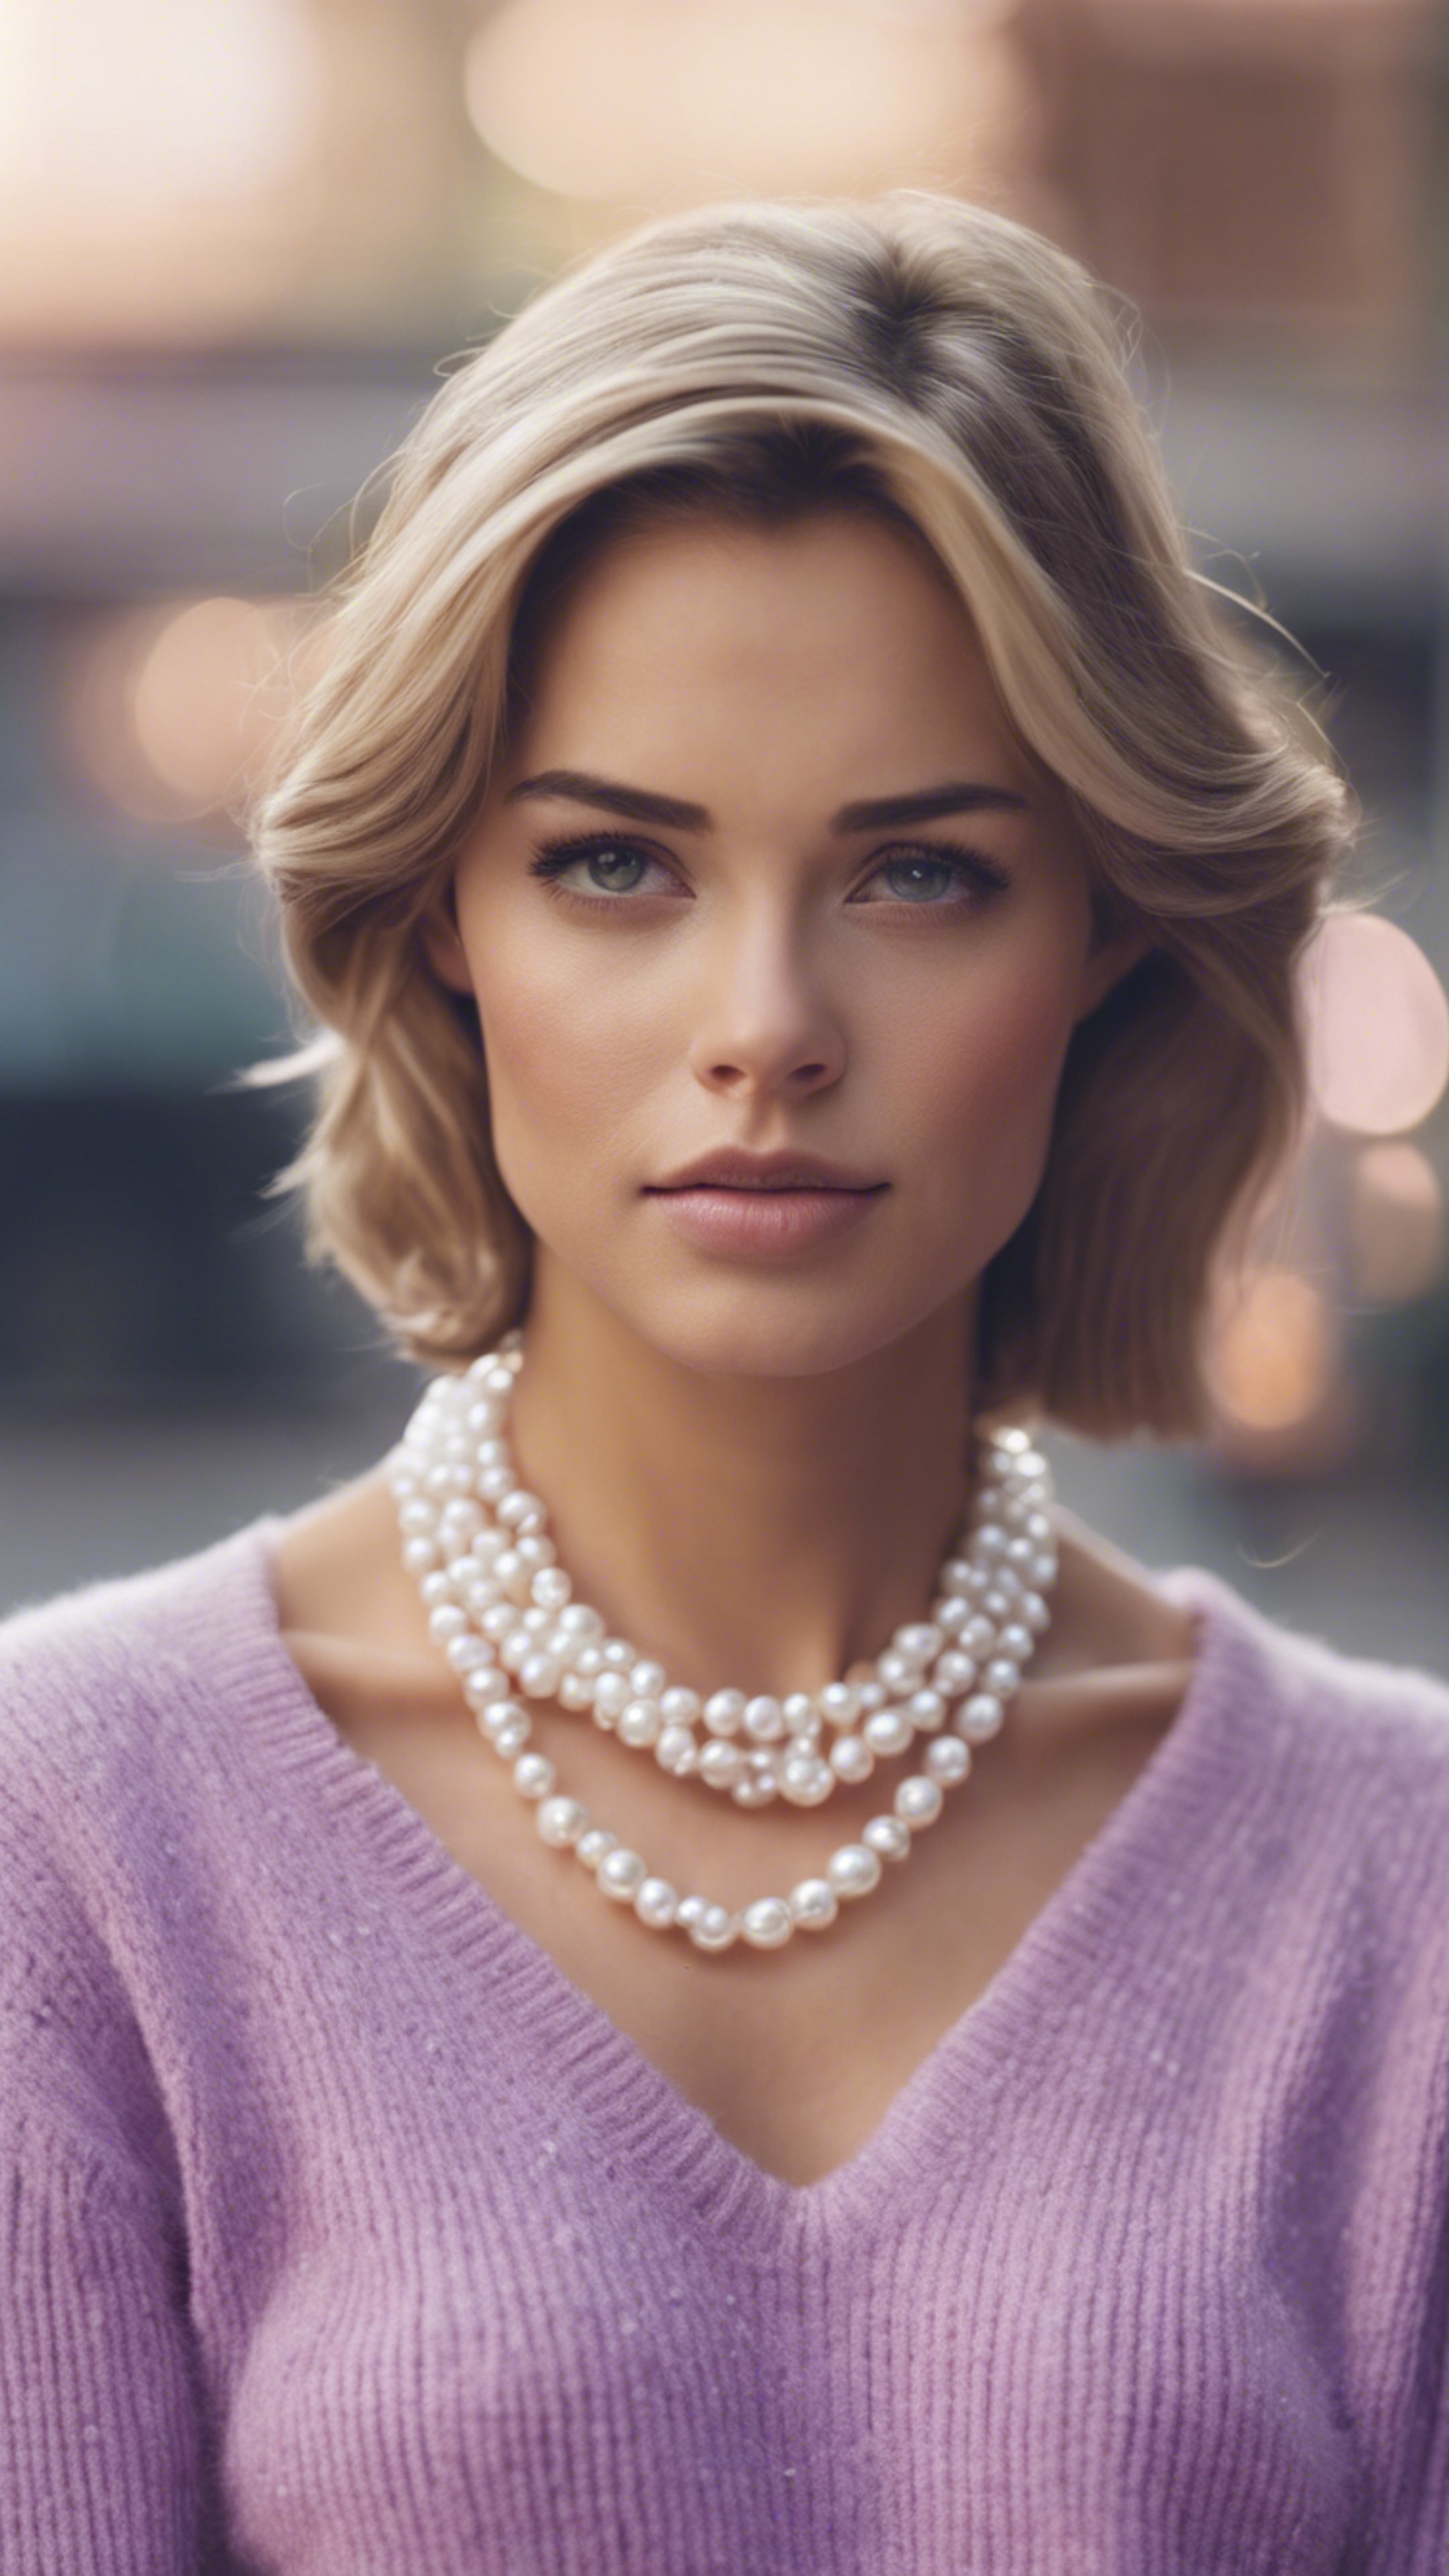 A stylish preppy woman wearing a pastel purple cashmere sweater and pearl necklace. کاغذ دیواری[eff5c75e56ed424daf90]